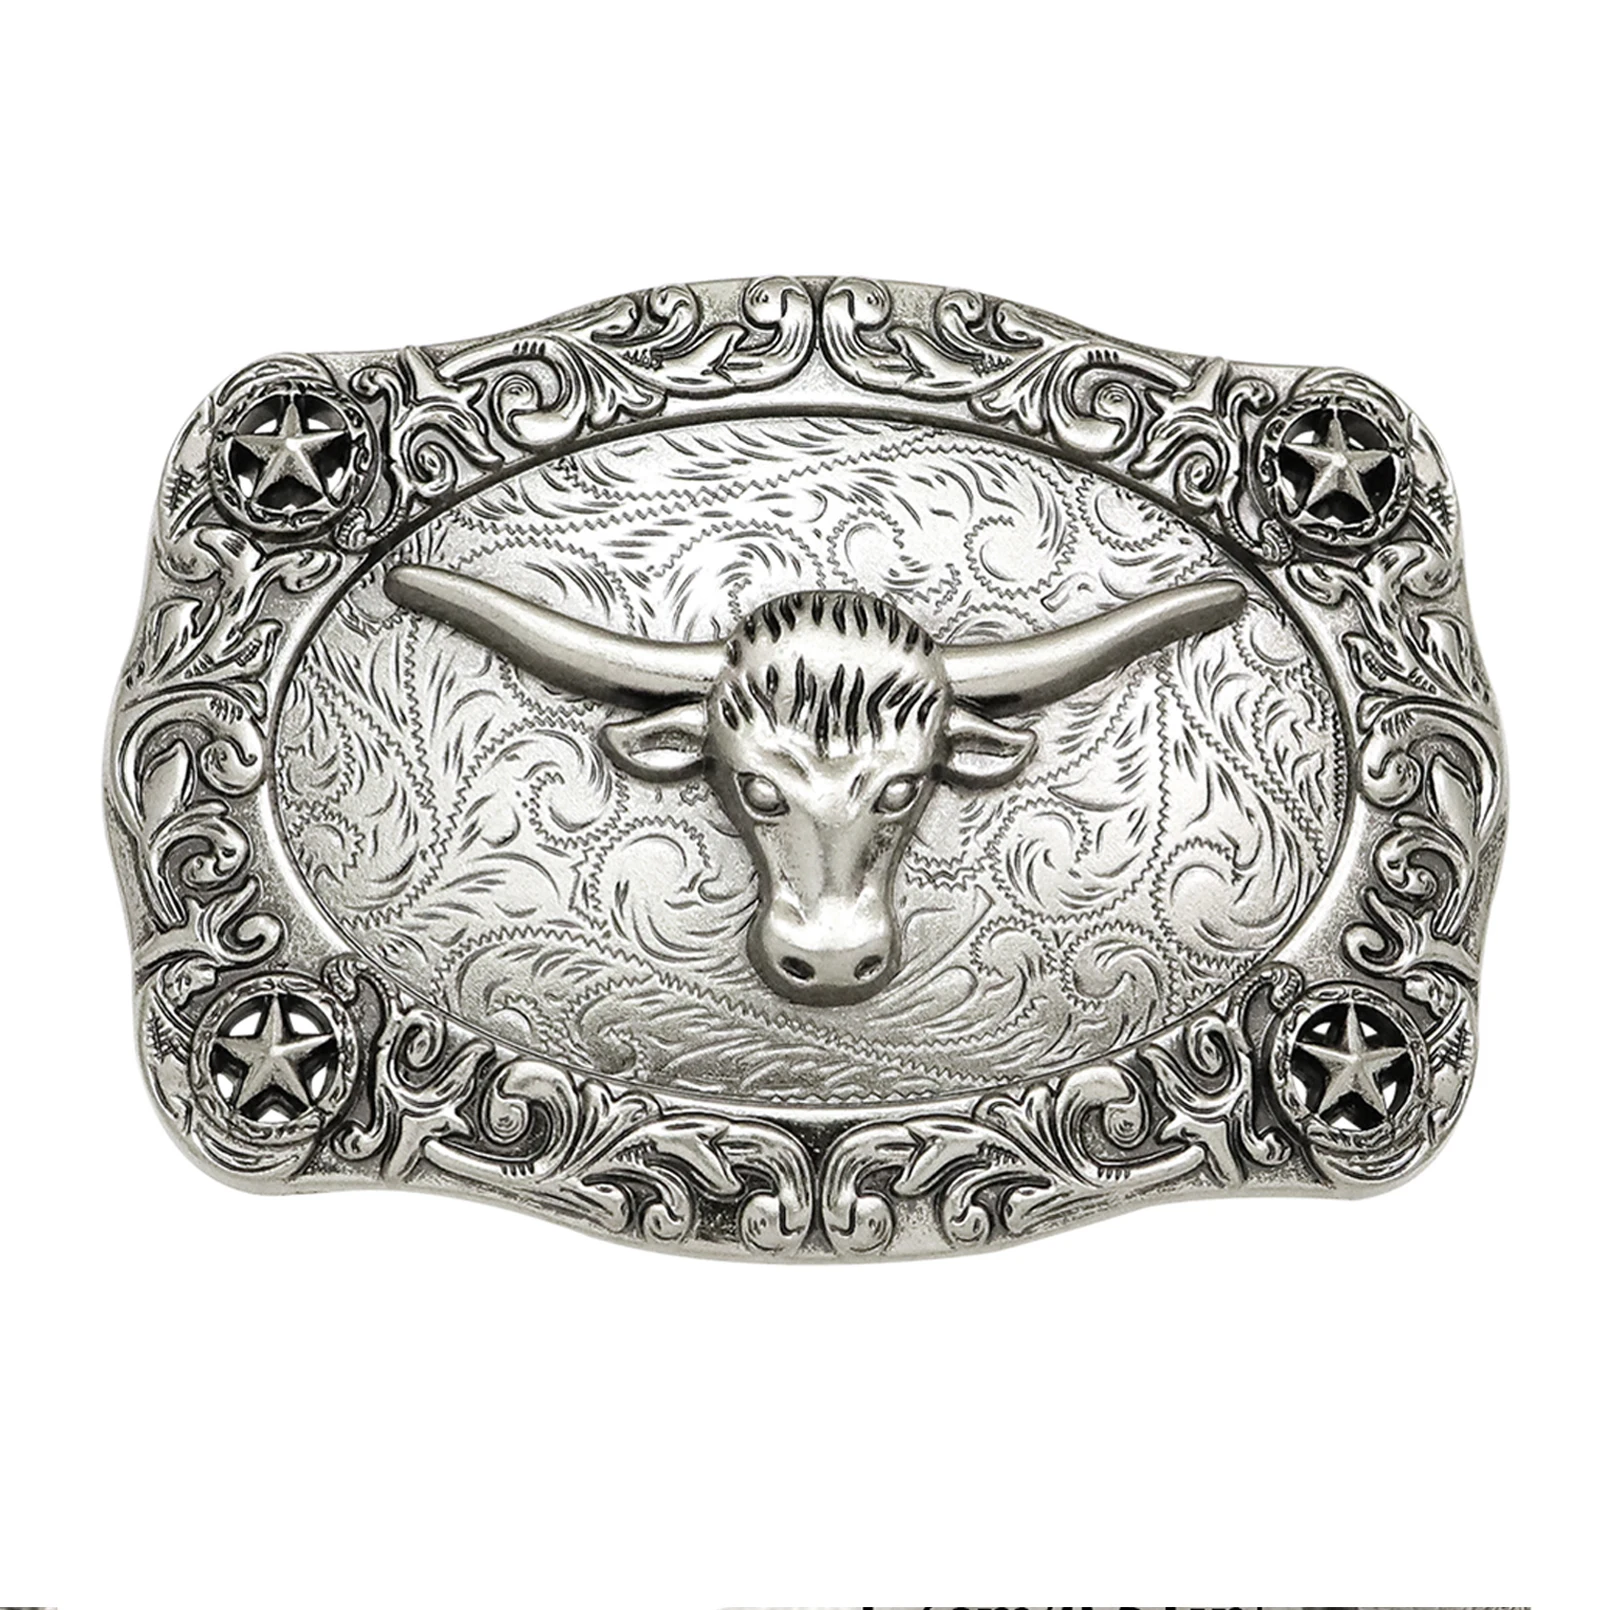 RechicGu Western Belts for Men Women, Initial Letter Big Buckle with Brown  Leather Longhorn Bull Engraved Cowboy Belt at  Men’s Clothing store